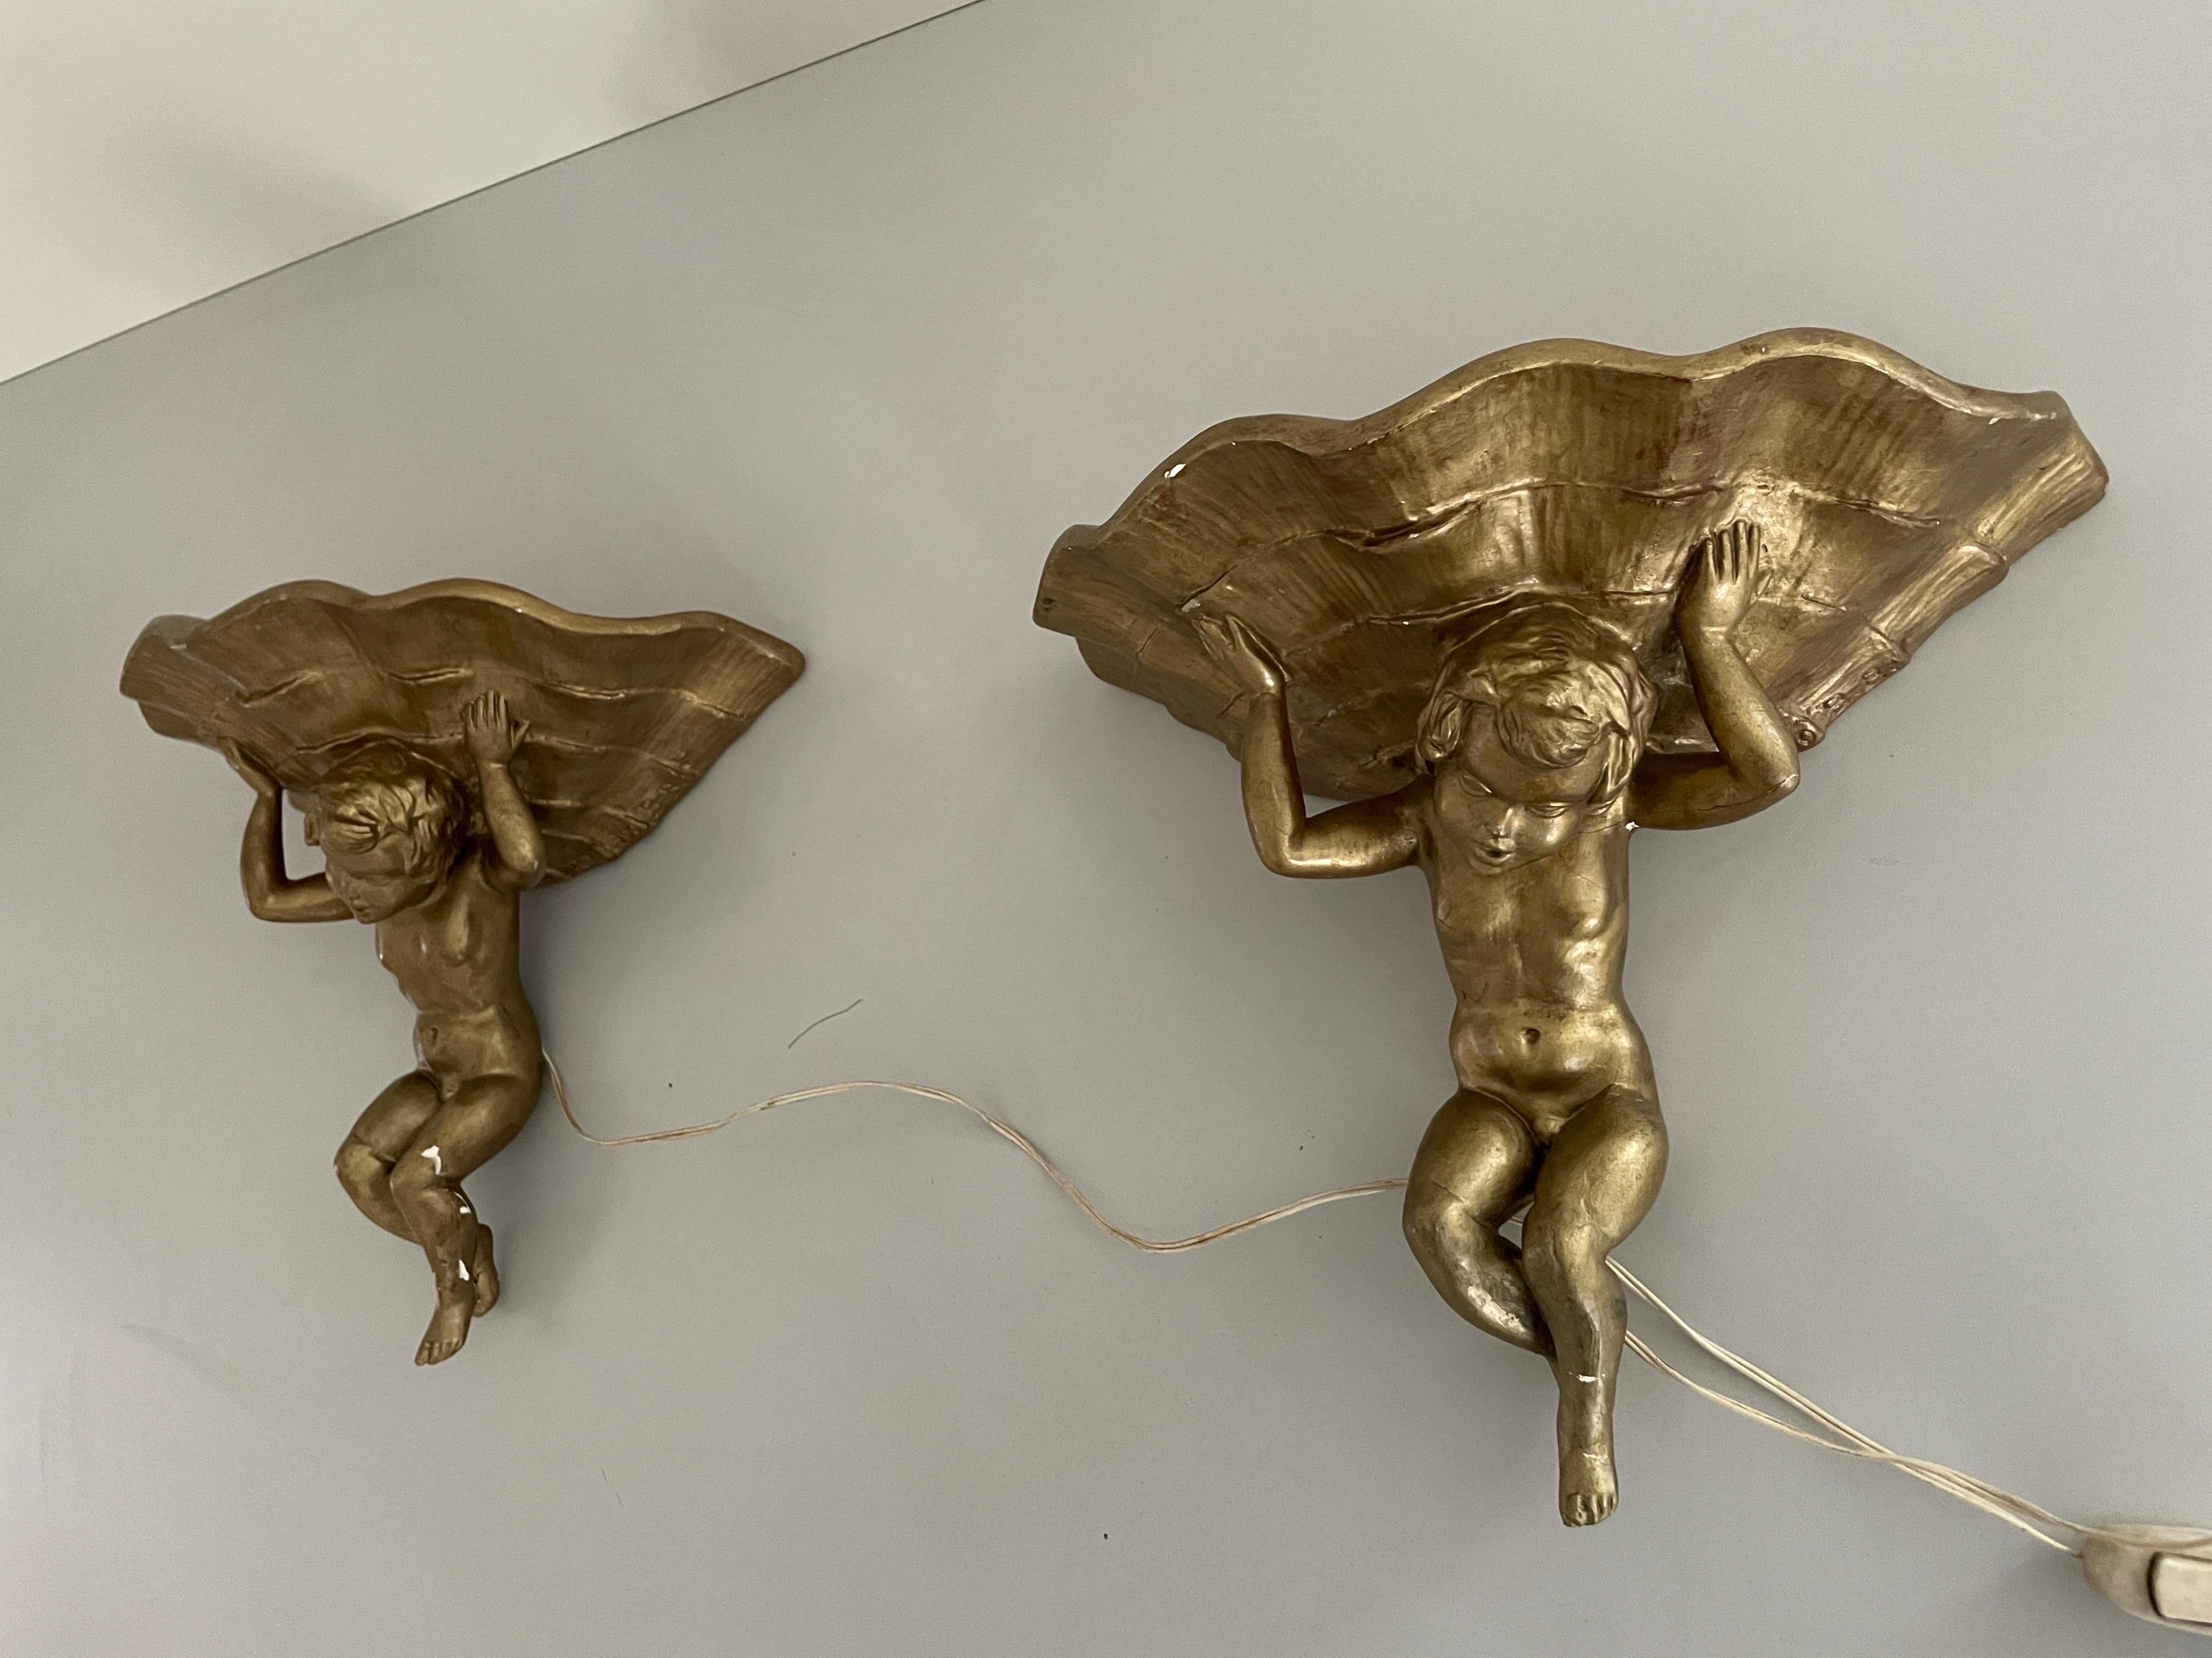 Made of Plaster Gold Coloured Pair of Sconces in Angel Sculpture, 1960s, Italy For Sale 1